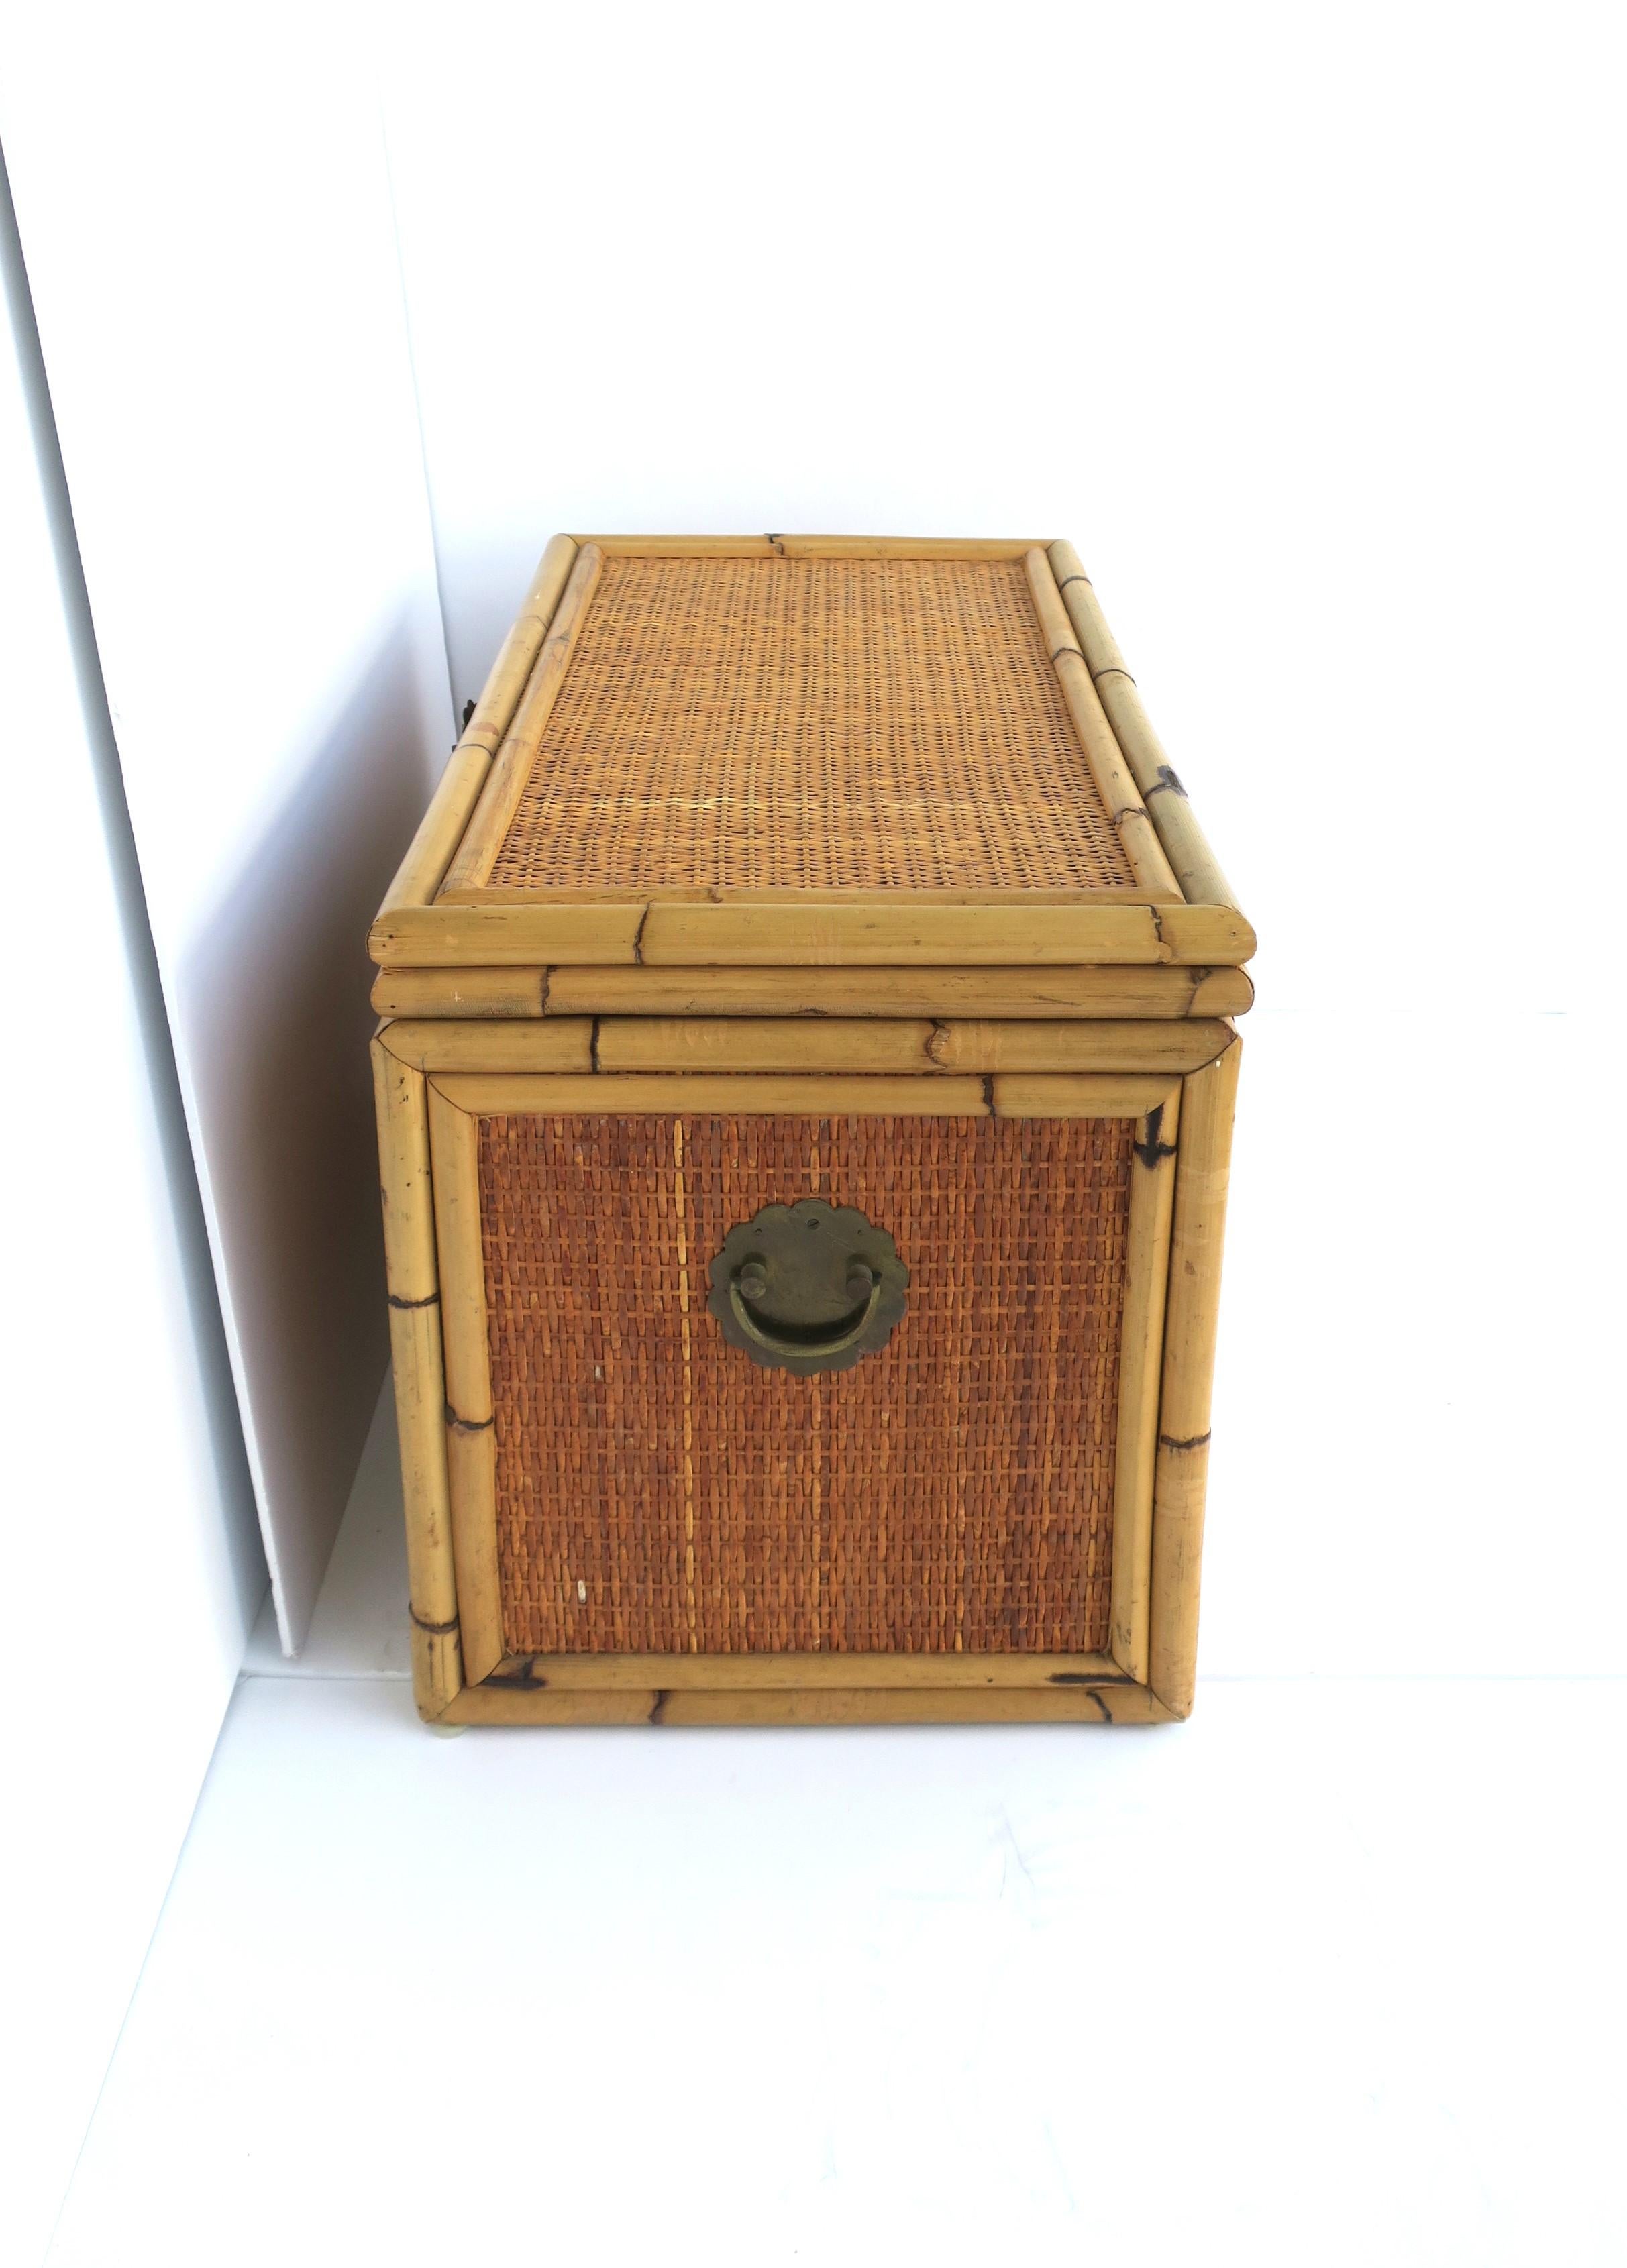 20th Century Wicker Bamboo Storage Chest Trunk Box or Cocktail Table